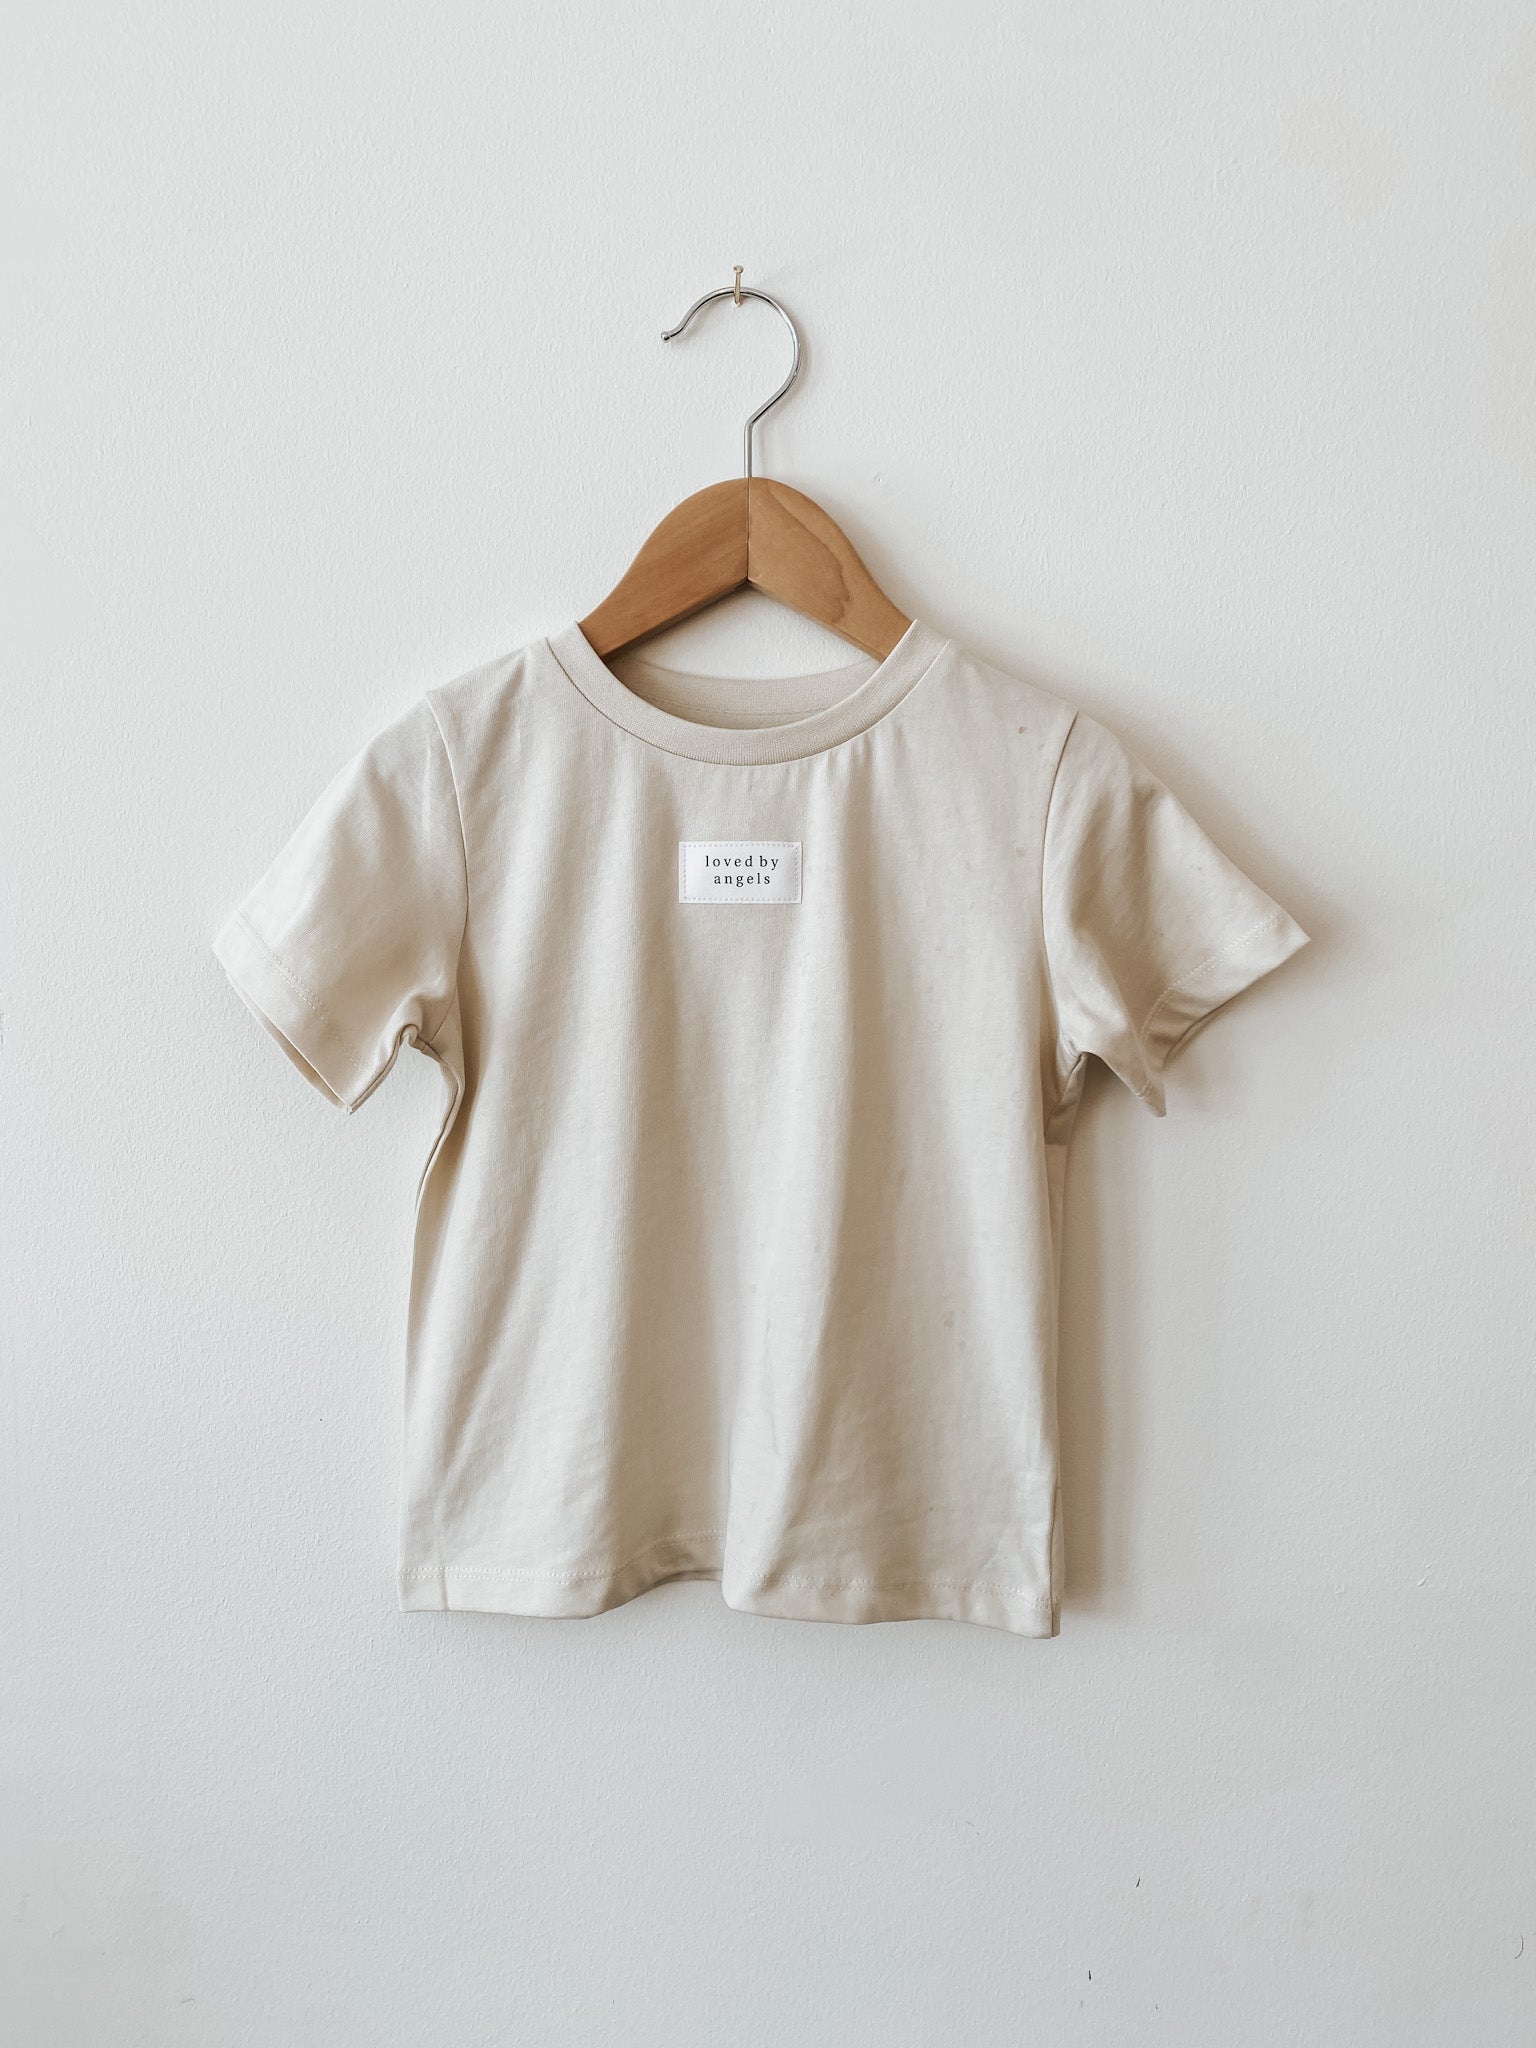 Classic Short Sleeve Tee | Loved By Angels